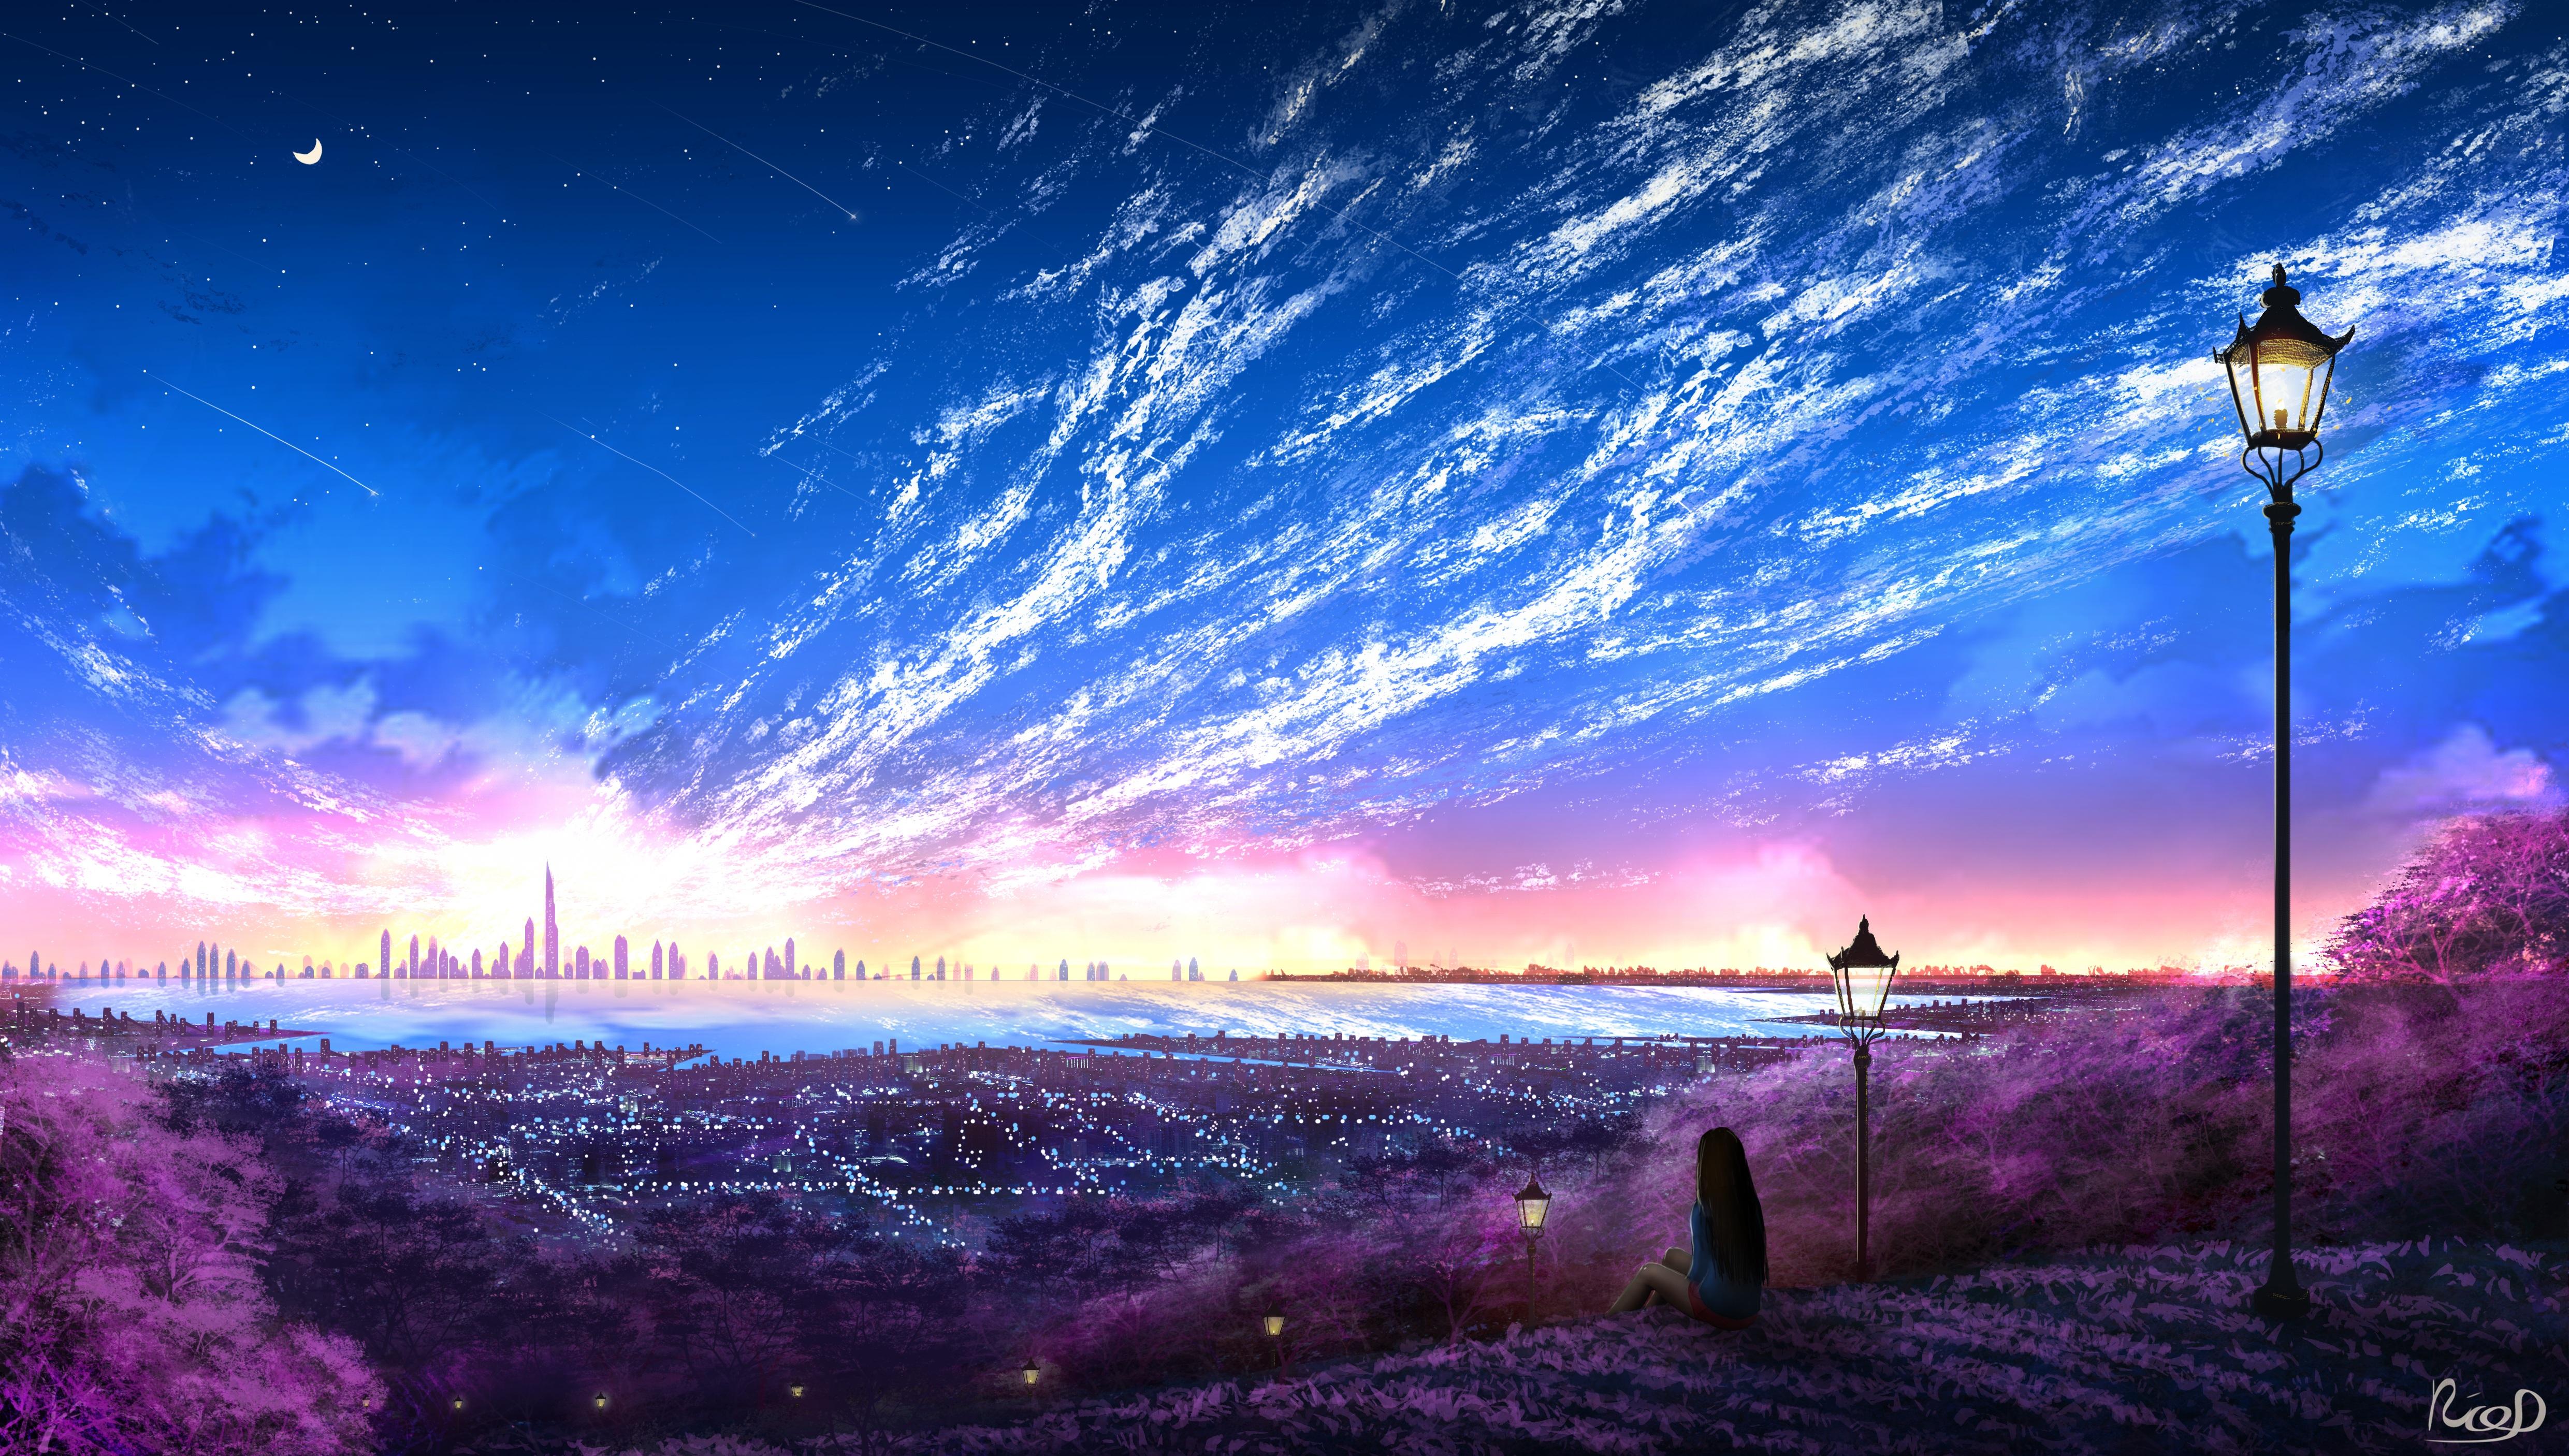 Wallpaper : 1920x1080 px, anime, cities, city, cityscapes, futuristic  1920x1080 - wallhaven - 1625283 - HD Wallpapers - WallHere